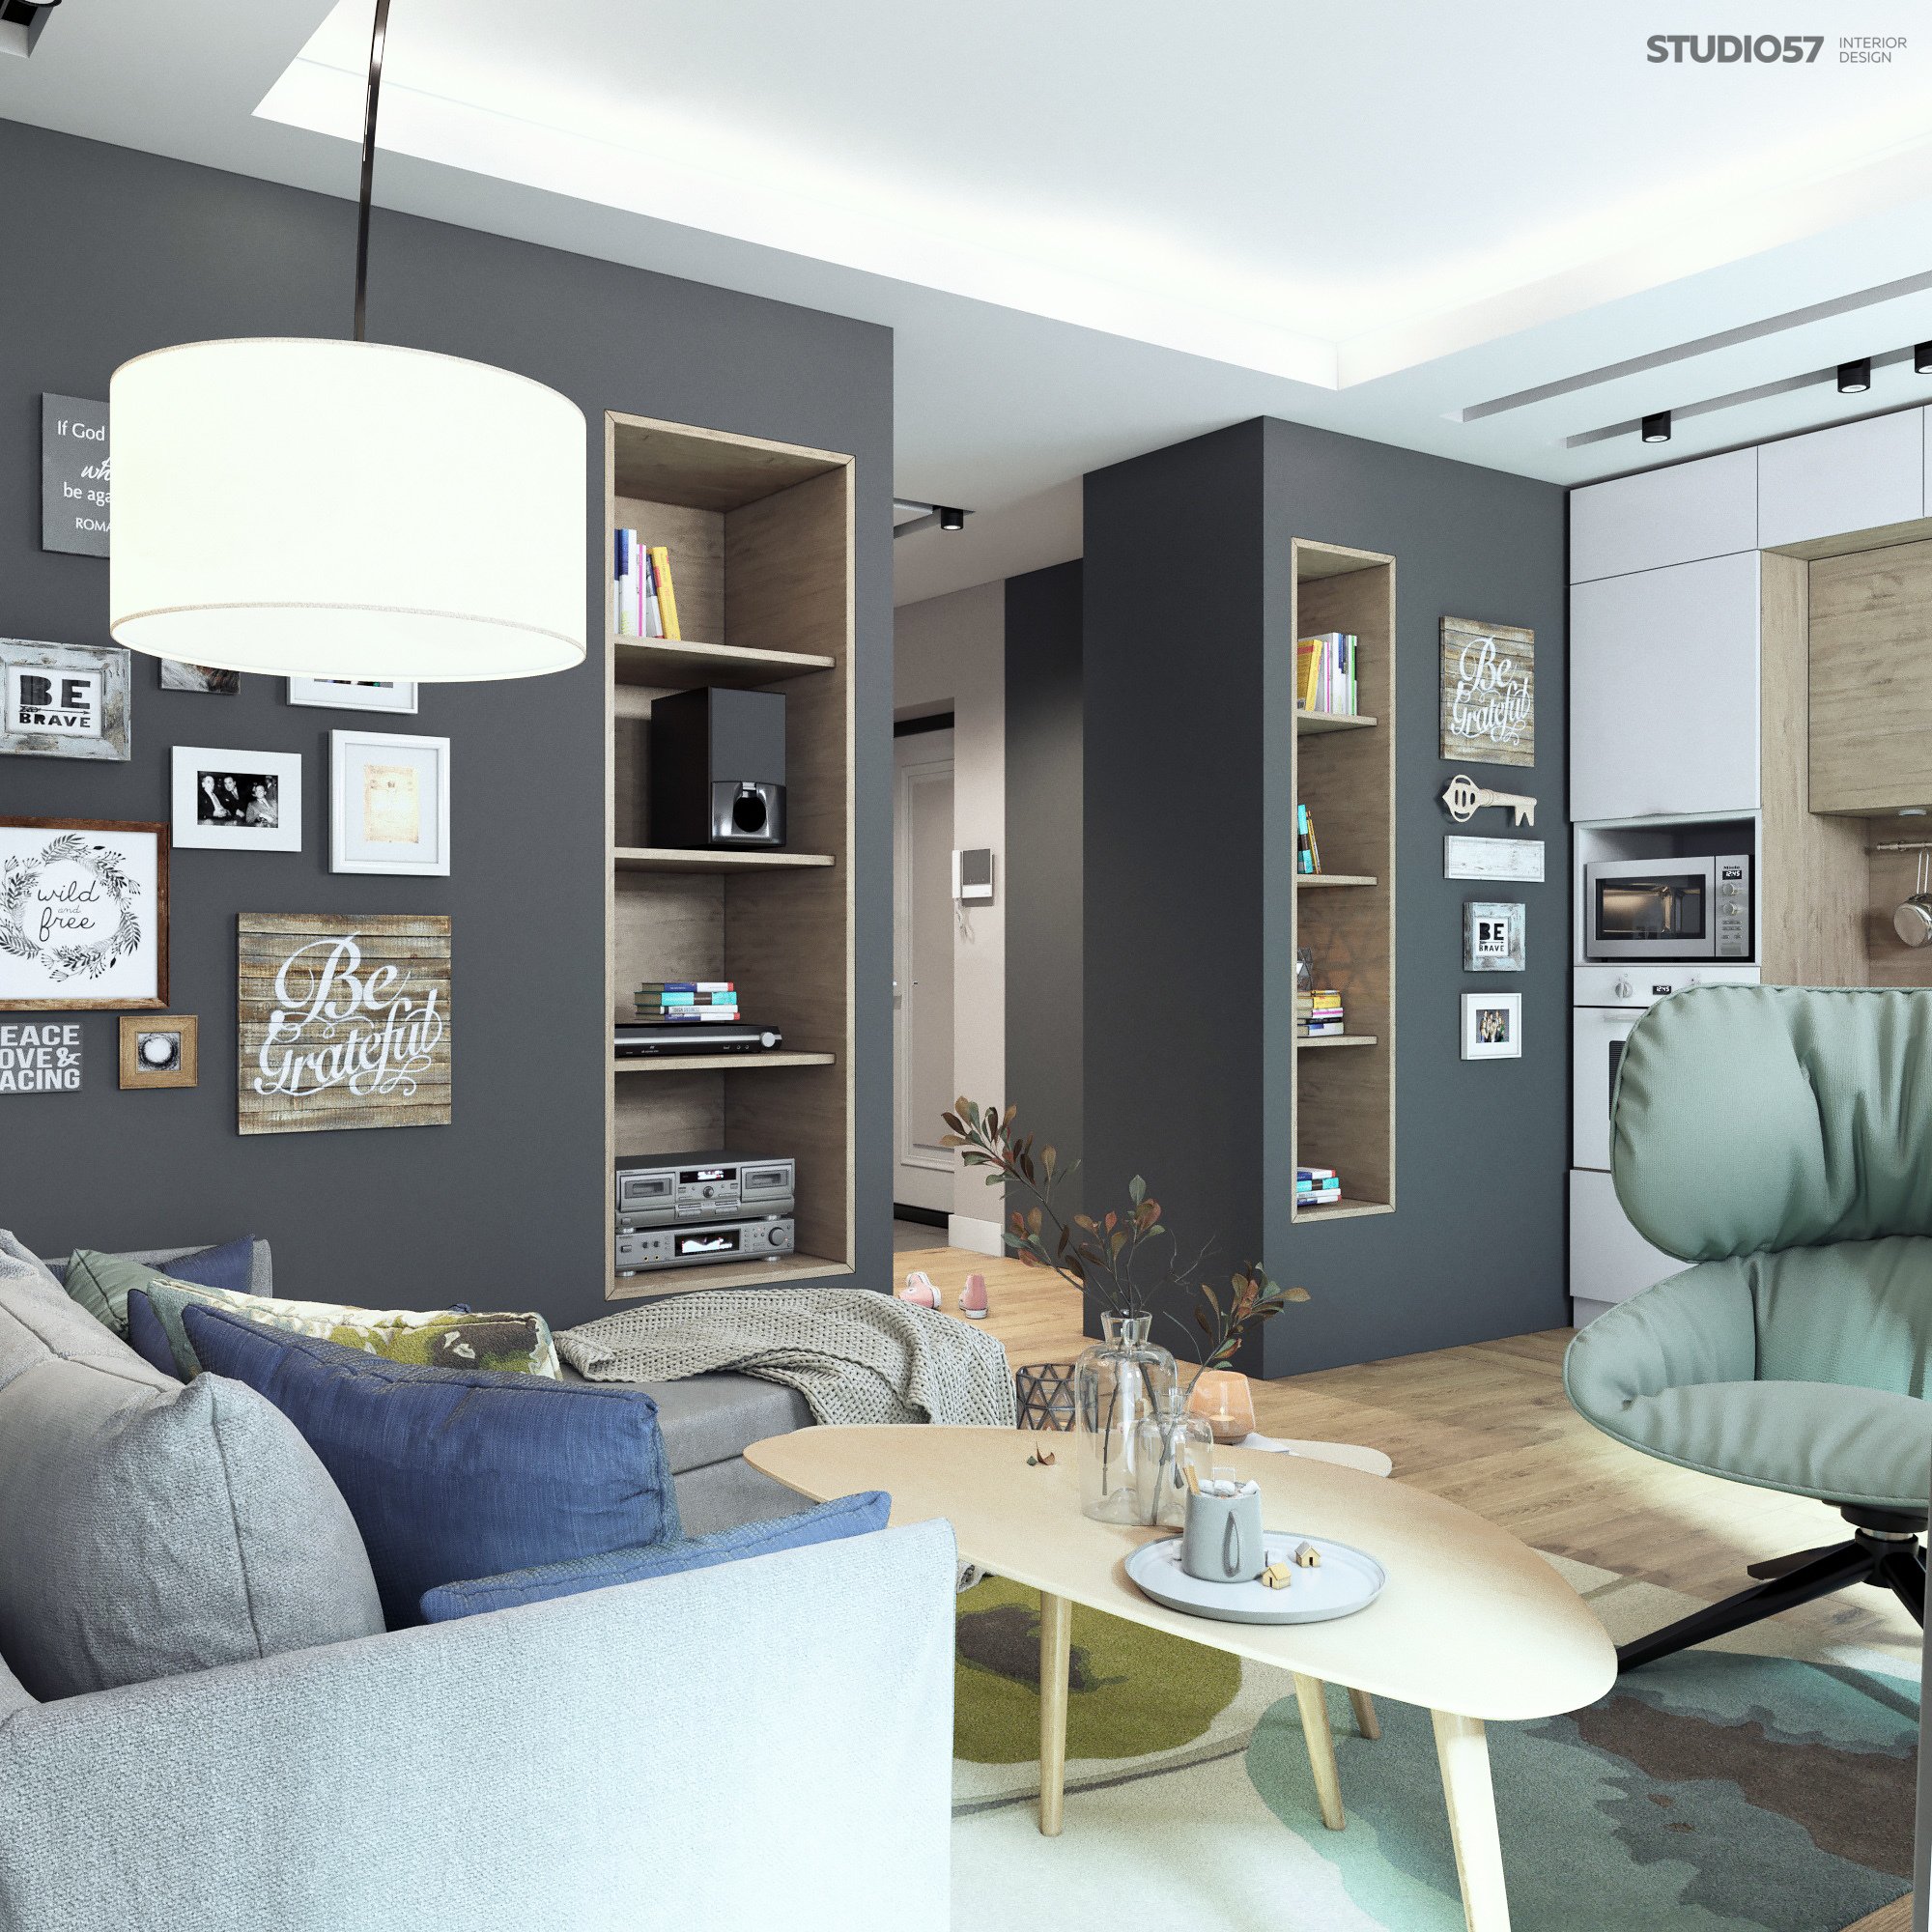 Design of the living room in the style of Contemporary photo